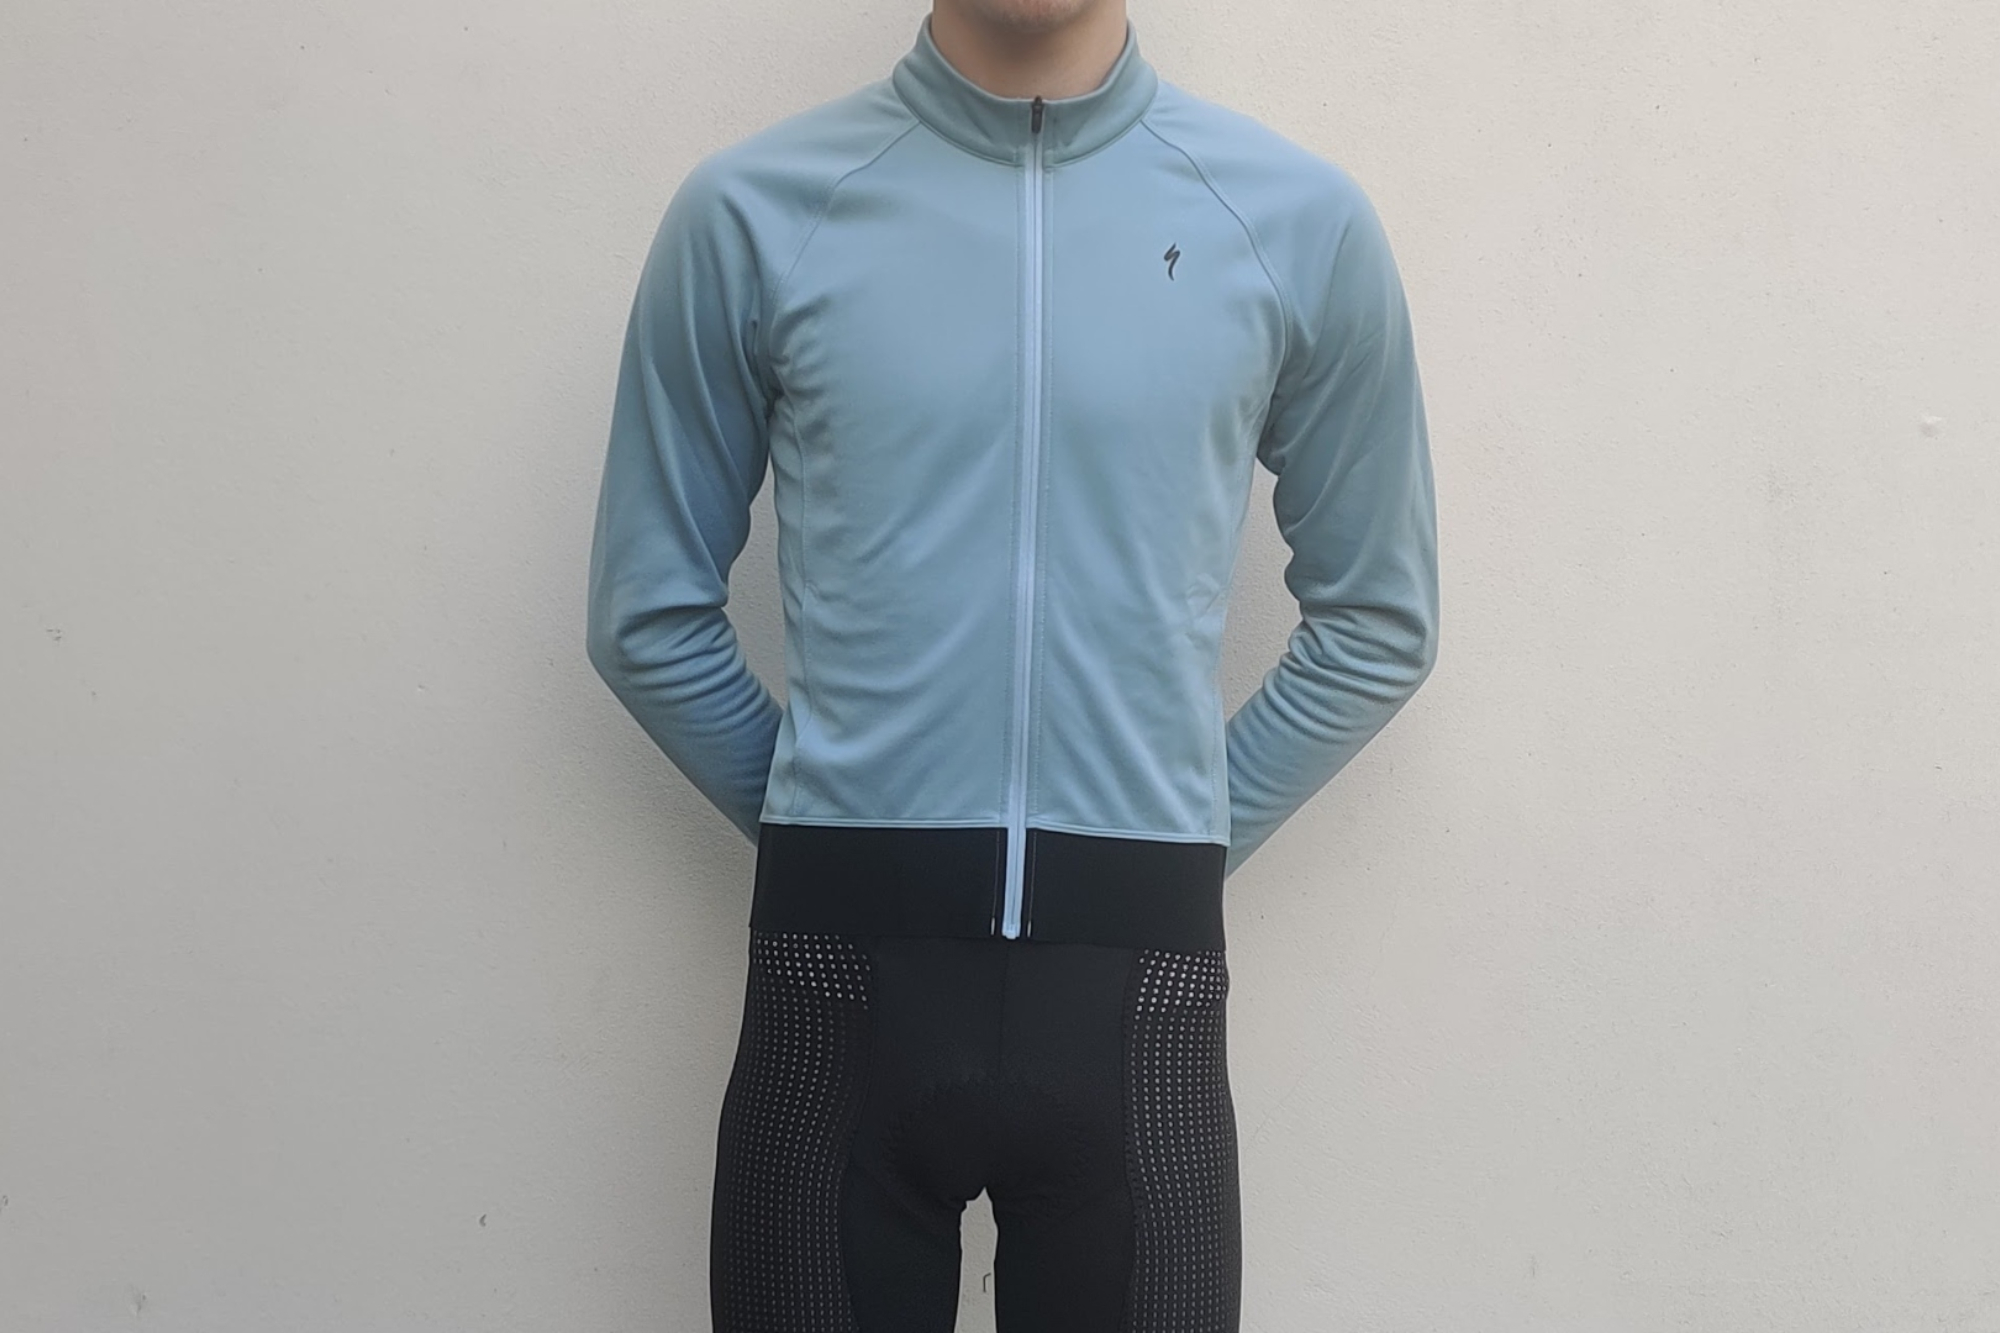 Image shows a rider wearing the Specialized Expert Thermal Long Sleeve Jersey.